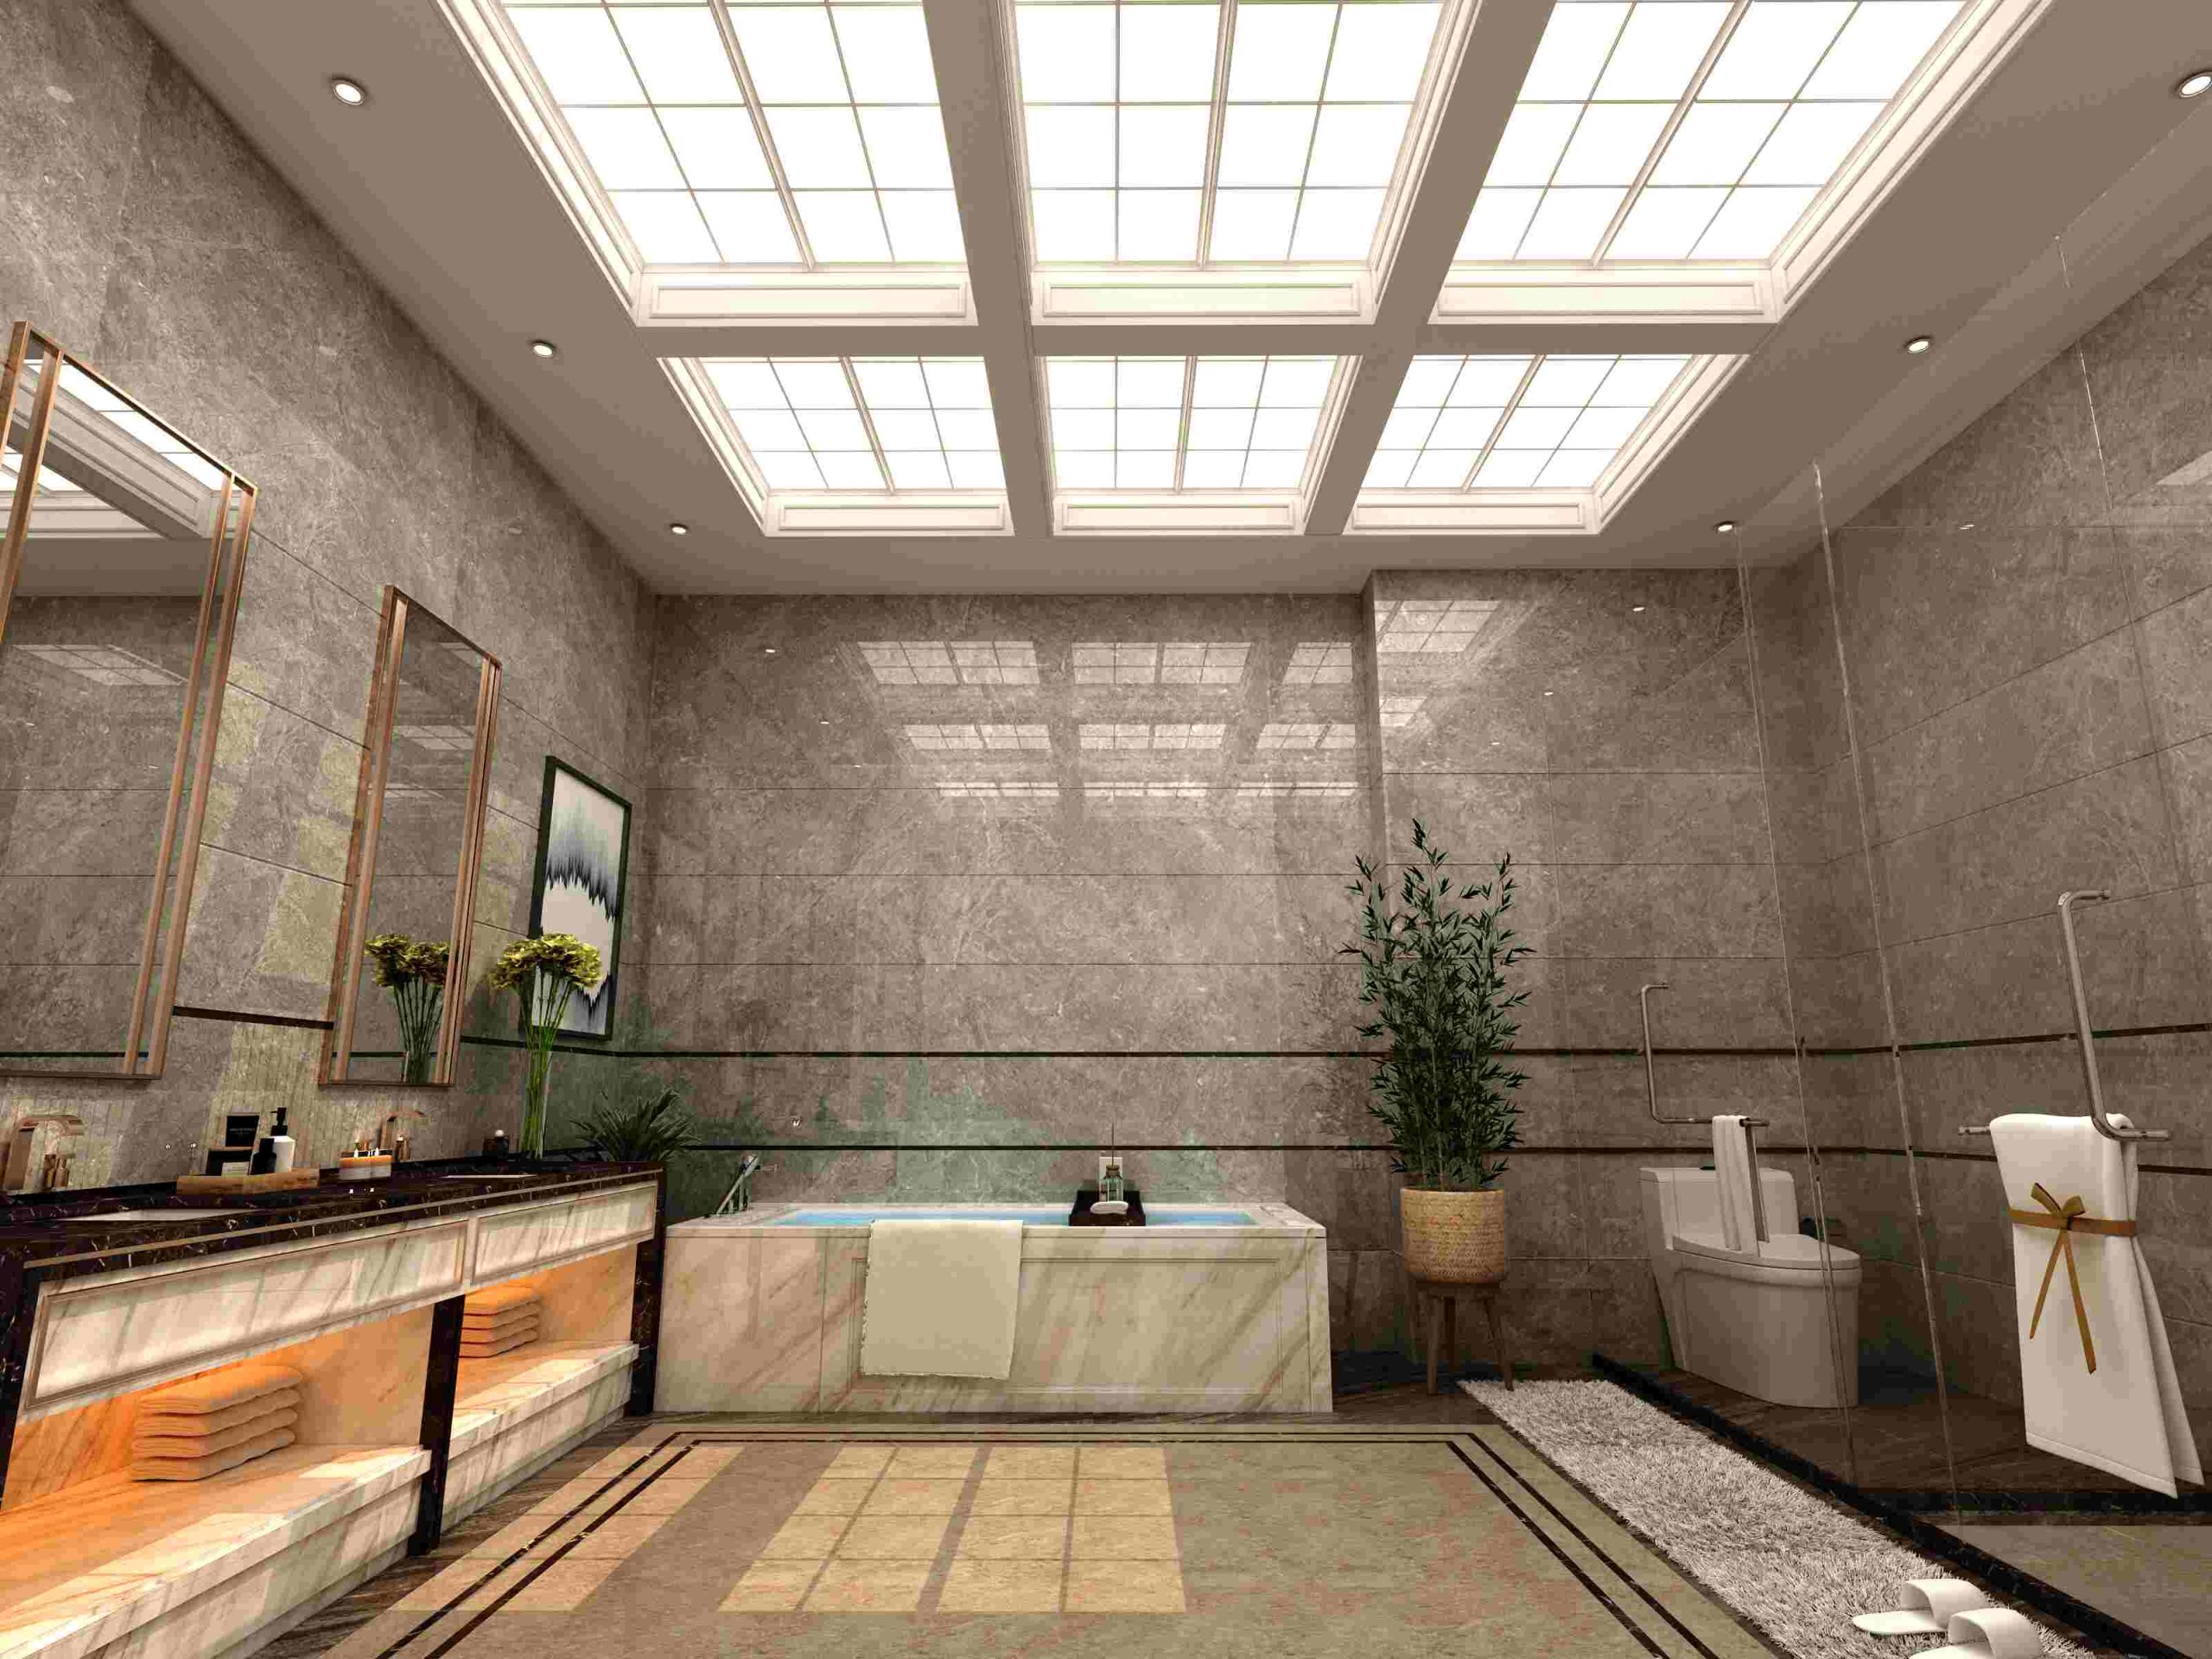 Sunrooof is a wellness ceiling lighting system installed in the washroom